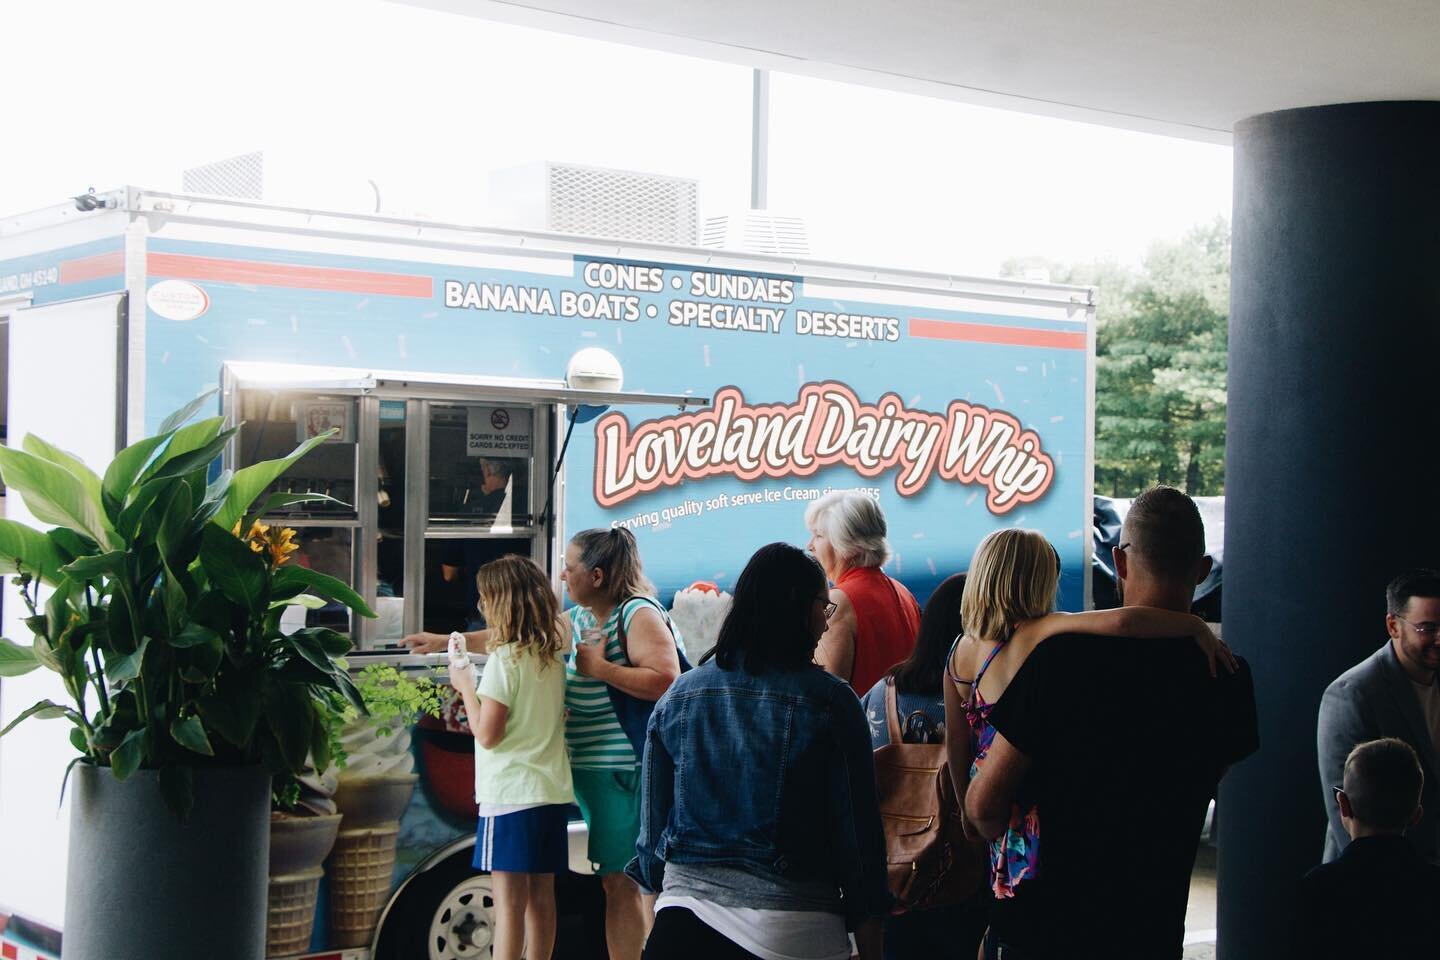 Who doesn&rsquo;t love free ice cream!? Happy National Ice Cream day church. We had such an incredible morning spent together. Huge shoutout to Will Stevenson for bringing such an incredible and encouraging message!